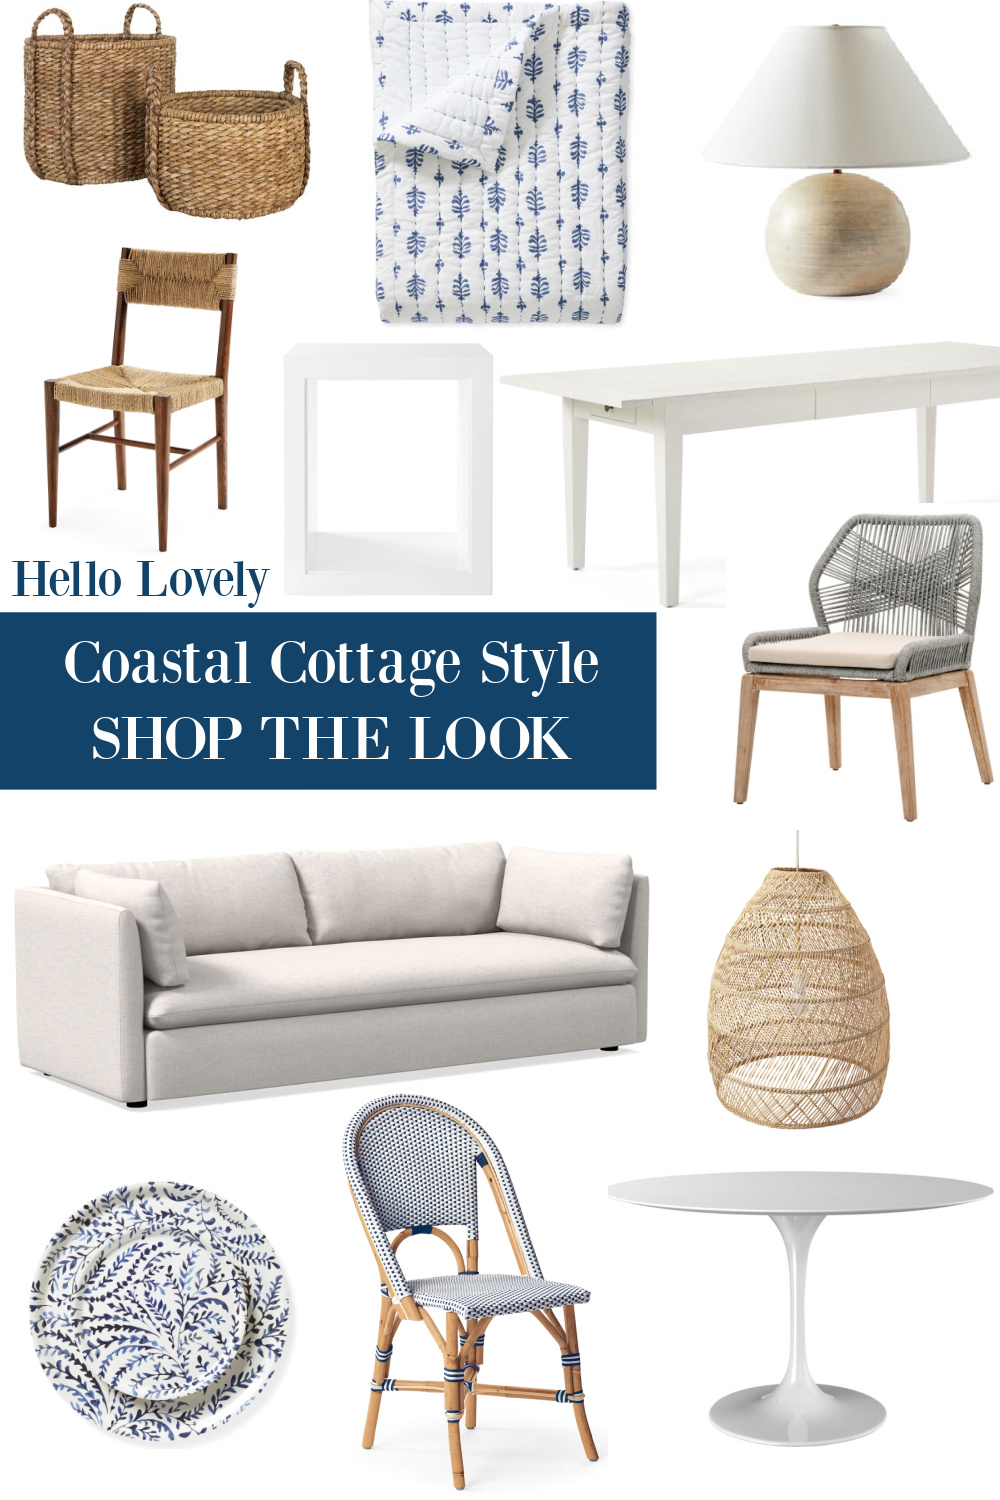 Hello Lovely Coastal Cottage Style Shop the Look - come see inspiration and resources for this classic interior design style!